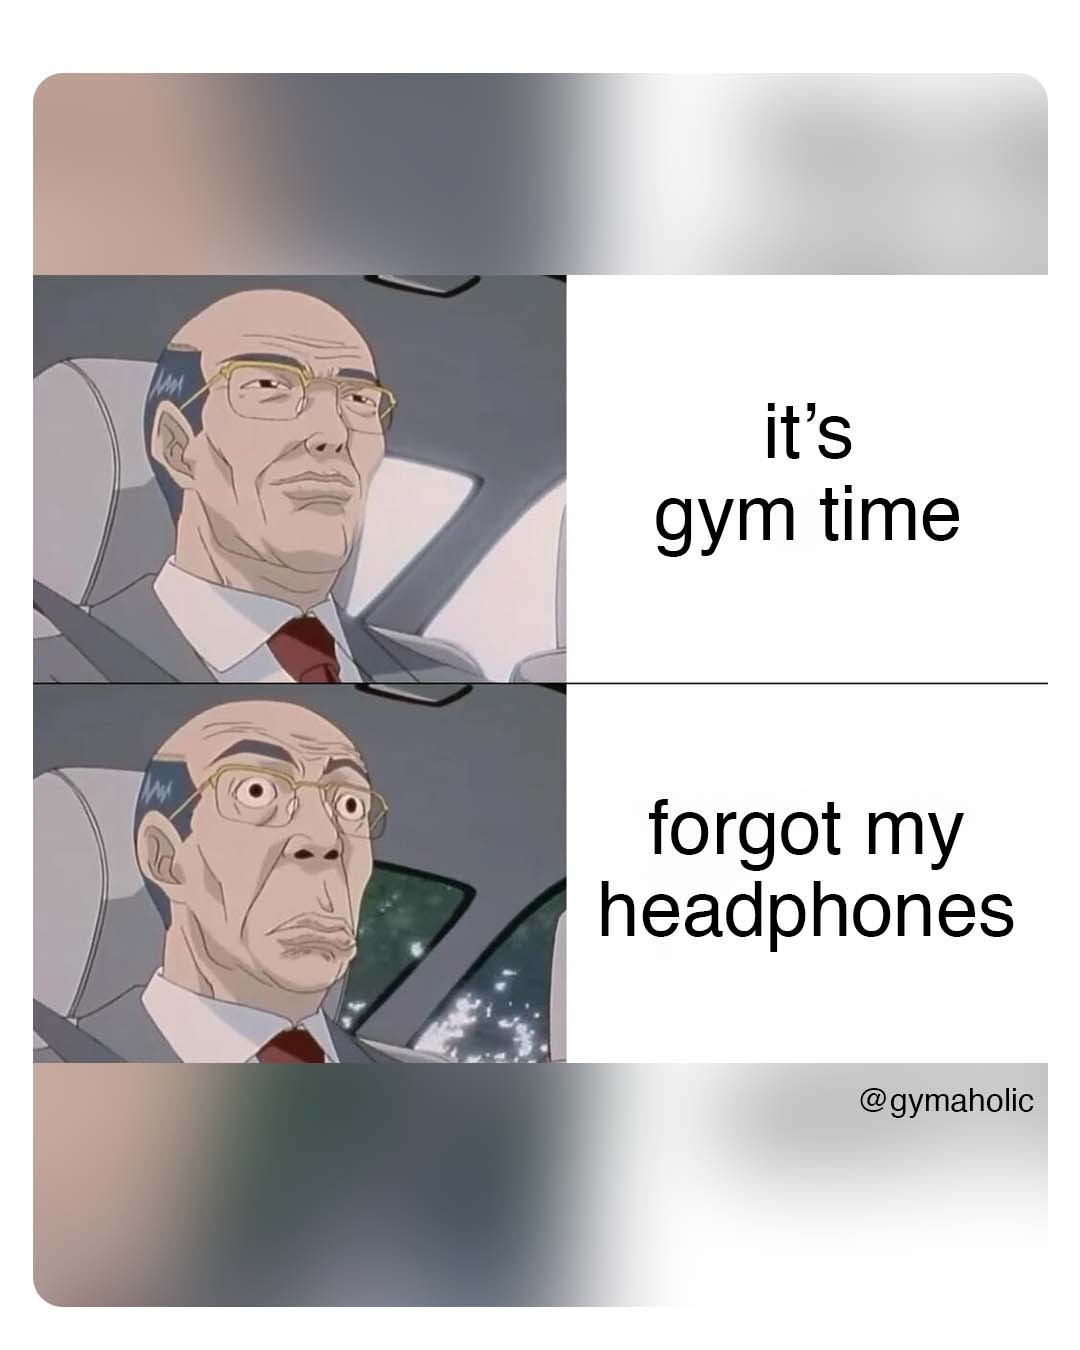 It’s gym time!